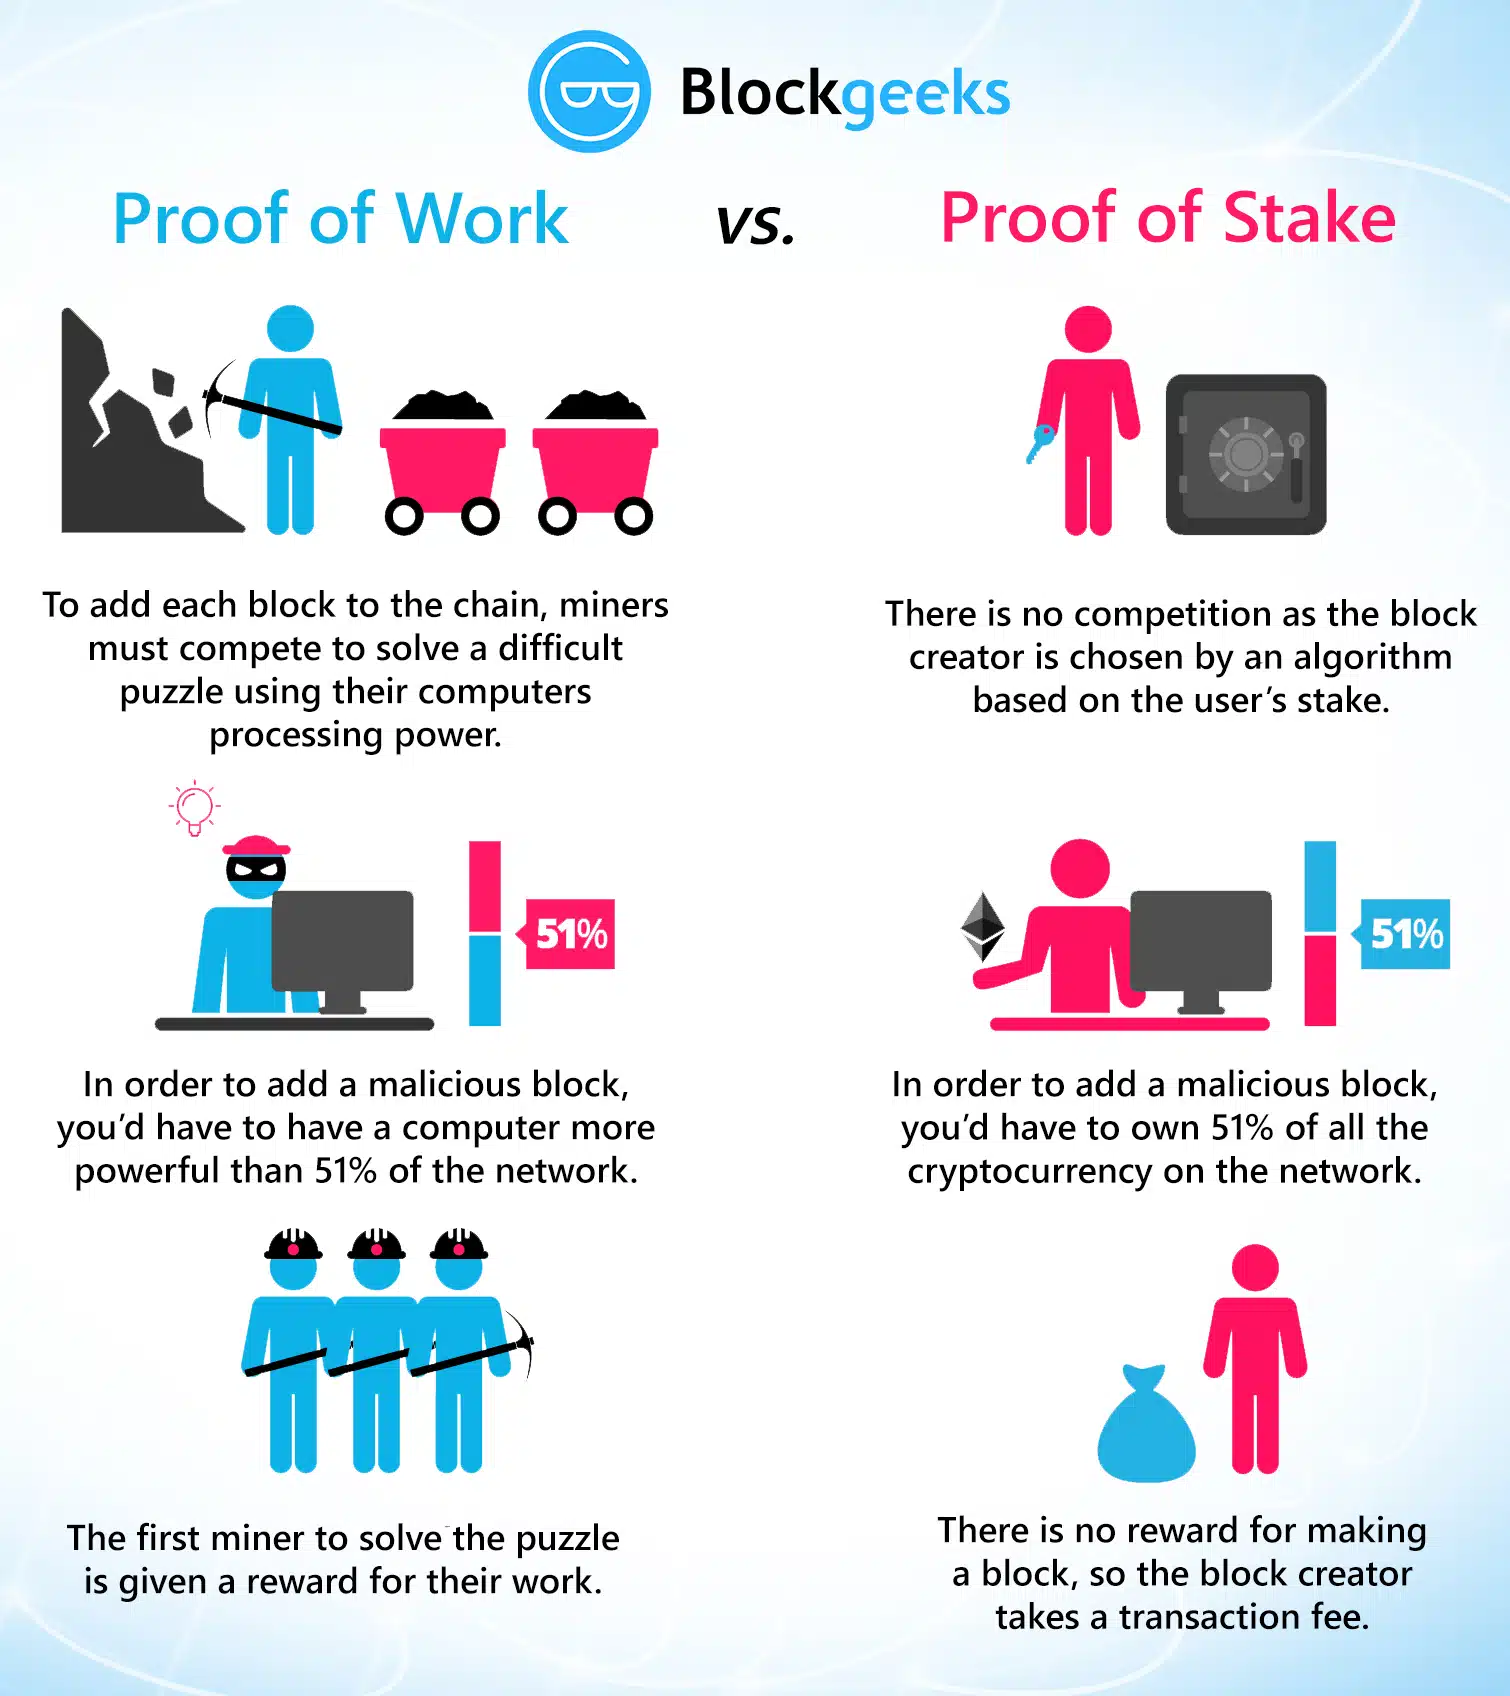 Infographic detailing the core differences between Proof of Work and Proof of Stake models.